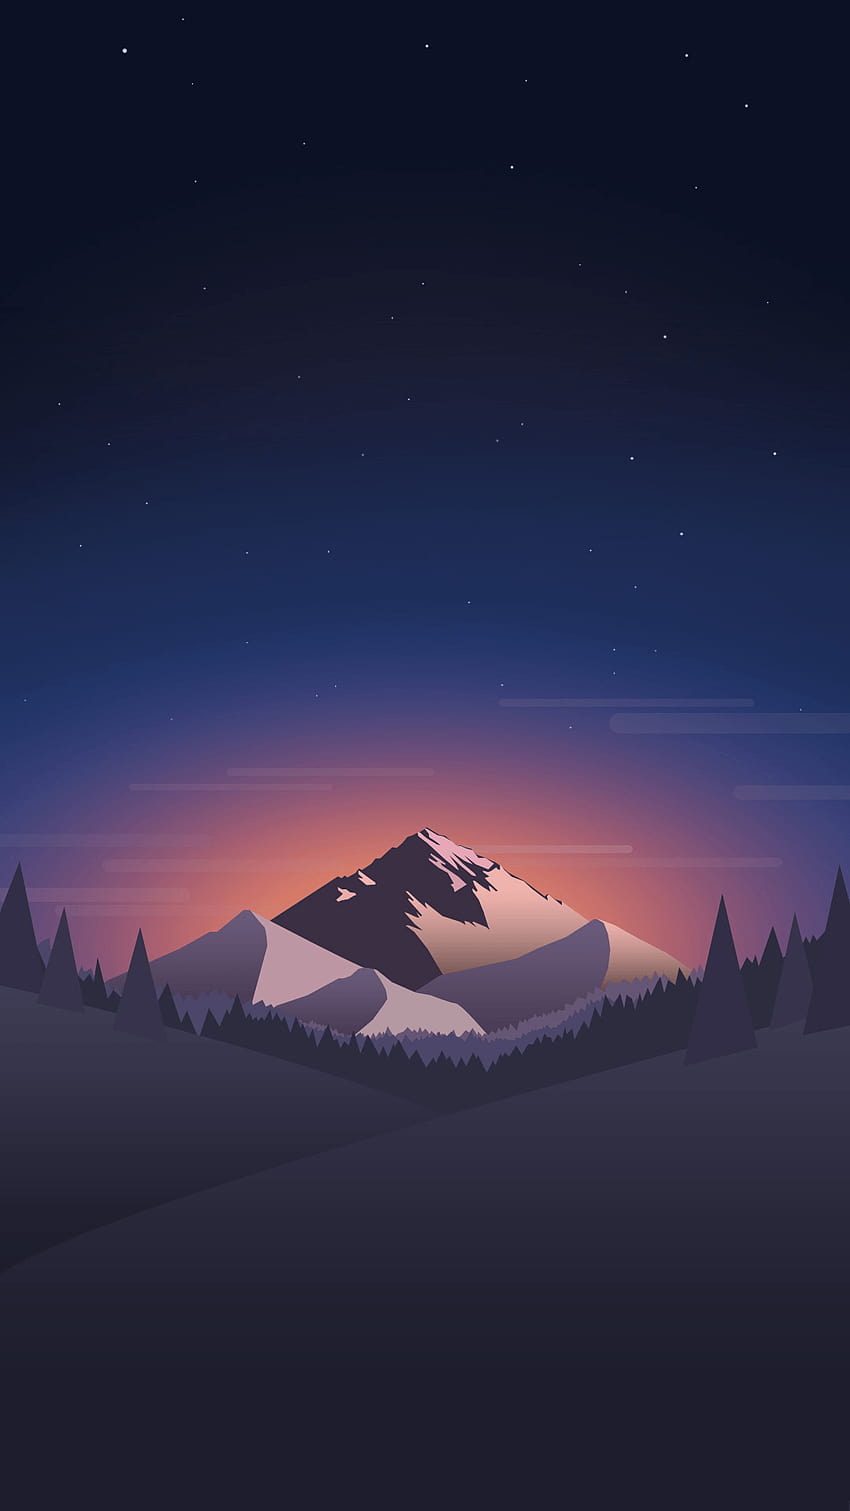 Mountain in night. Tap for landscape in material design iPhone, night mountains HD phone wallpaper